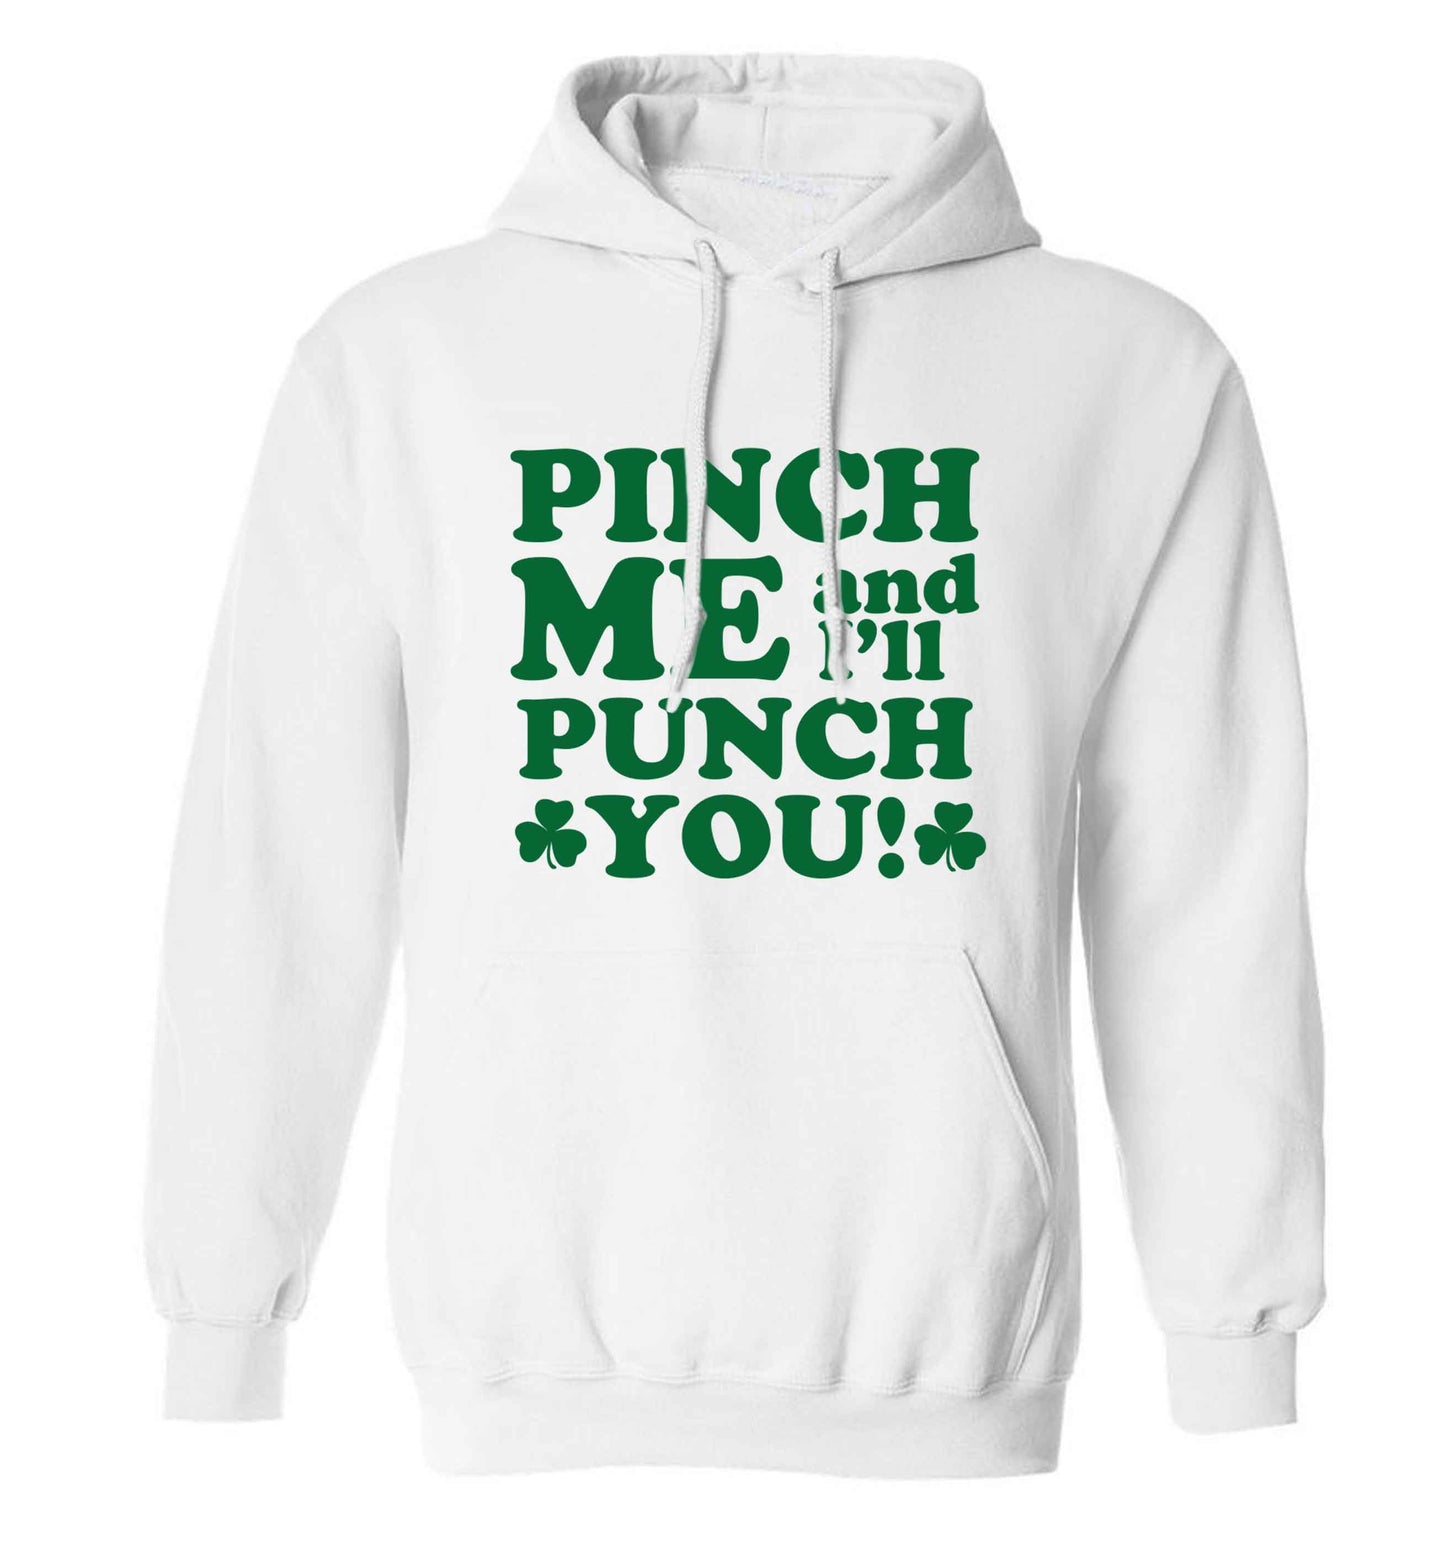 Pinch me and I'll punch you adults unisex white hoodie 2XL